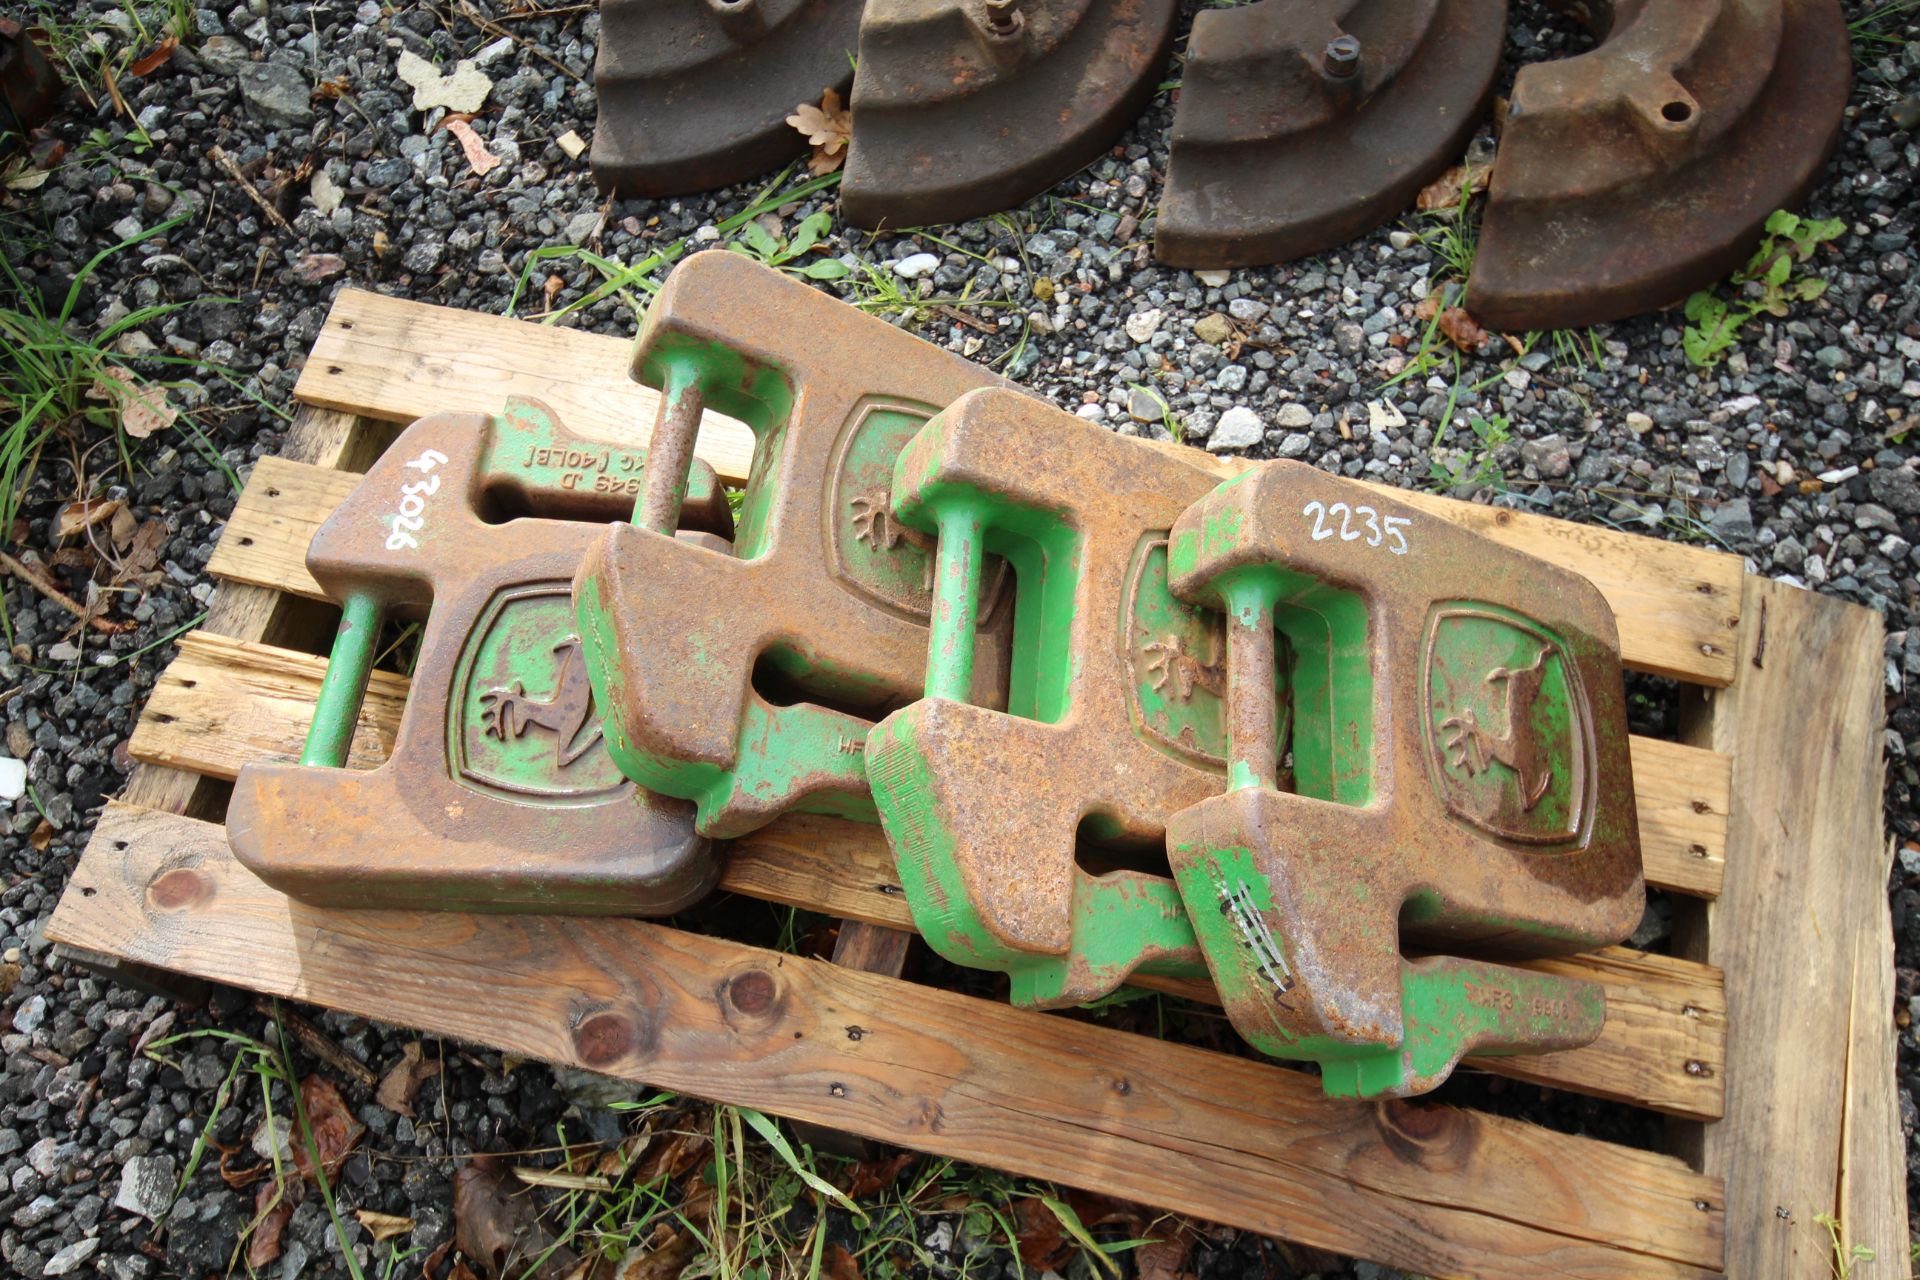 4x John Deere weights. For sale due to retirement. V